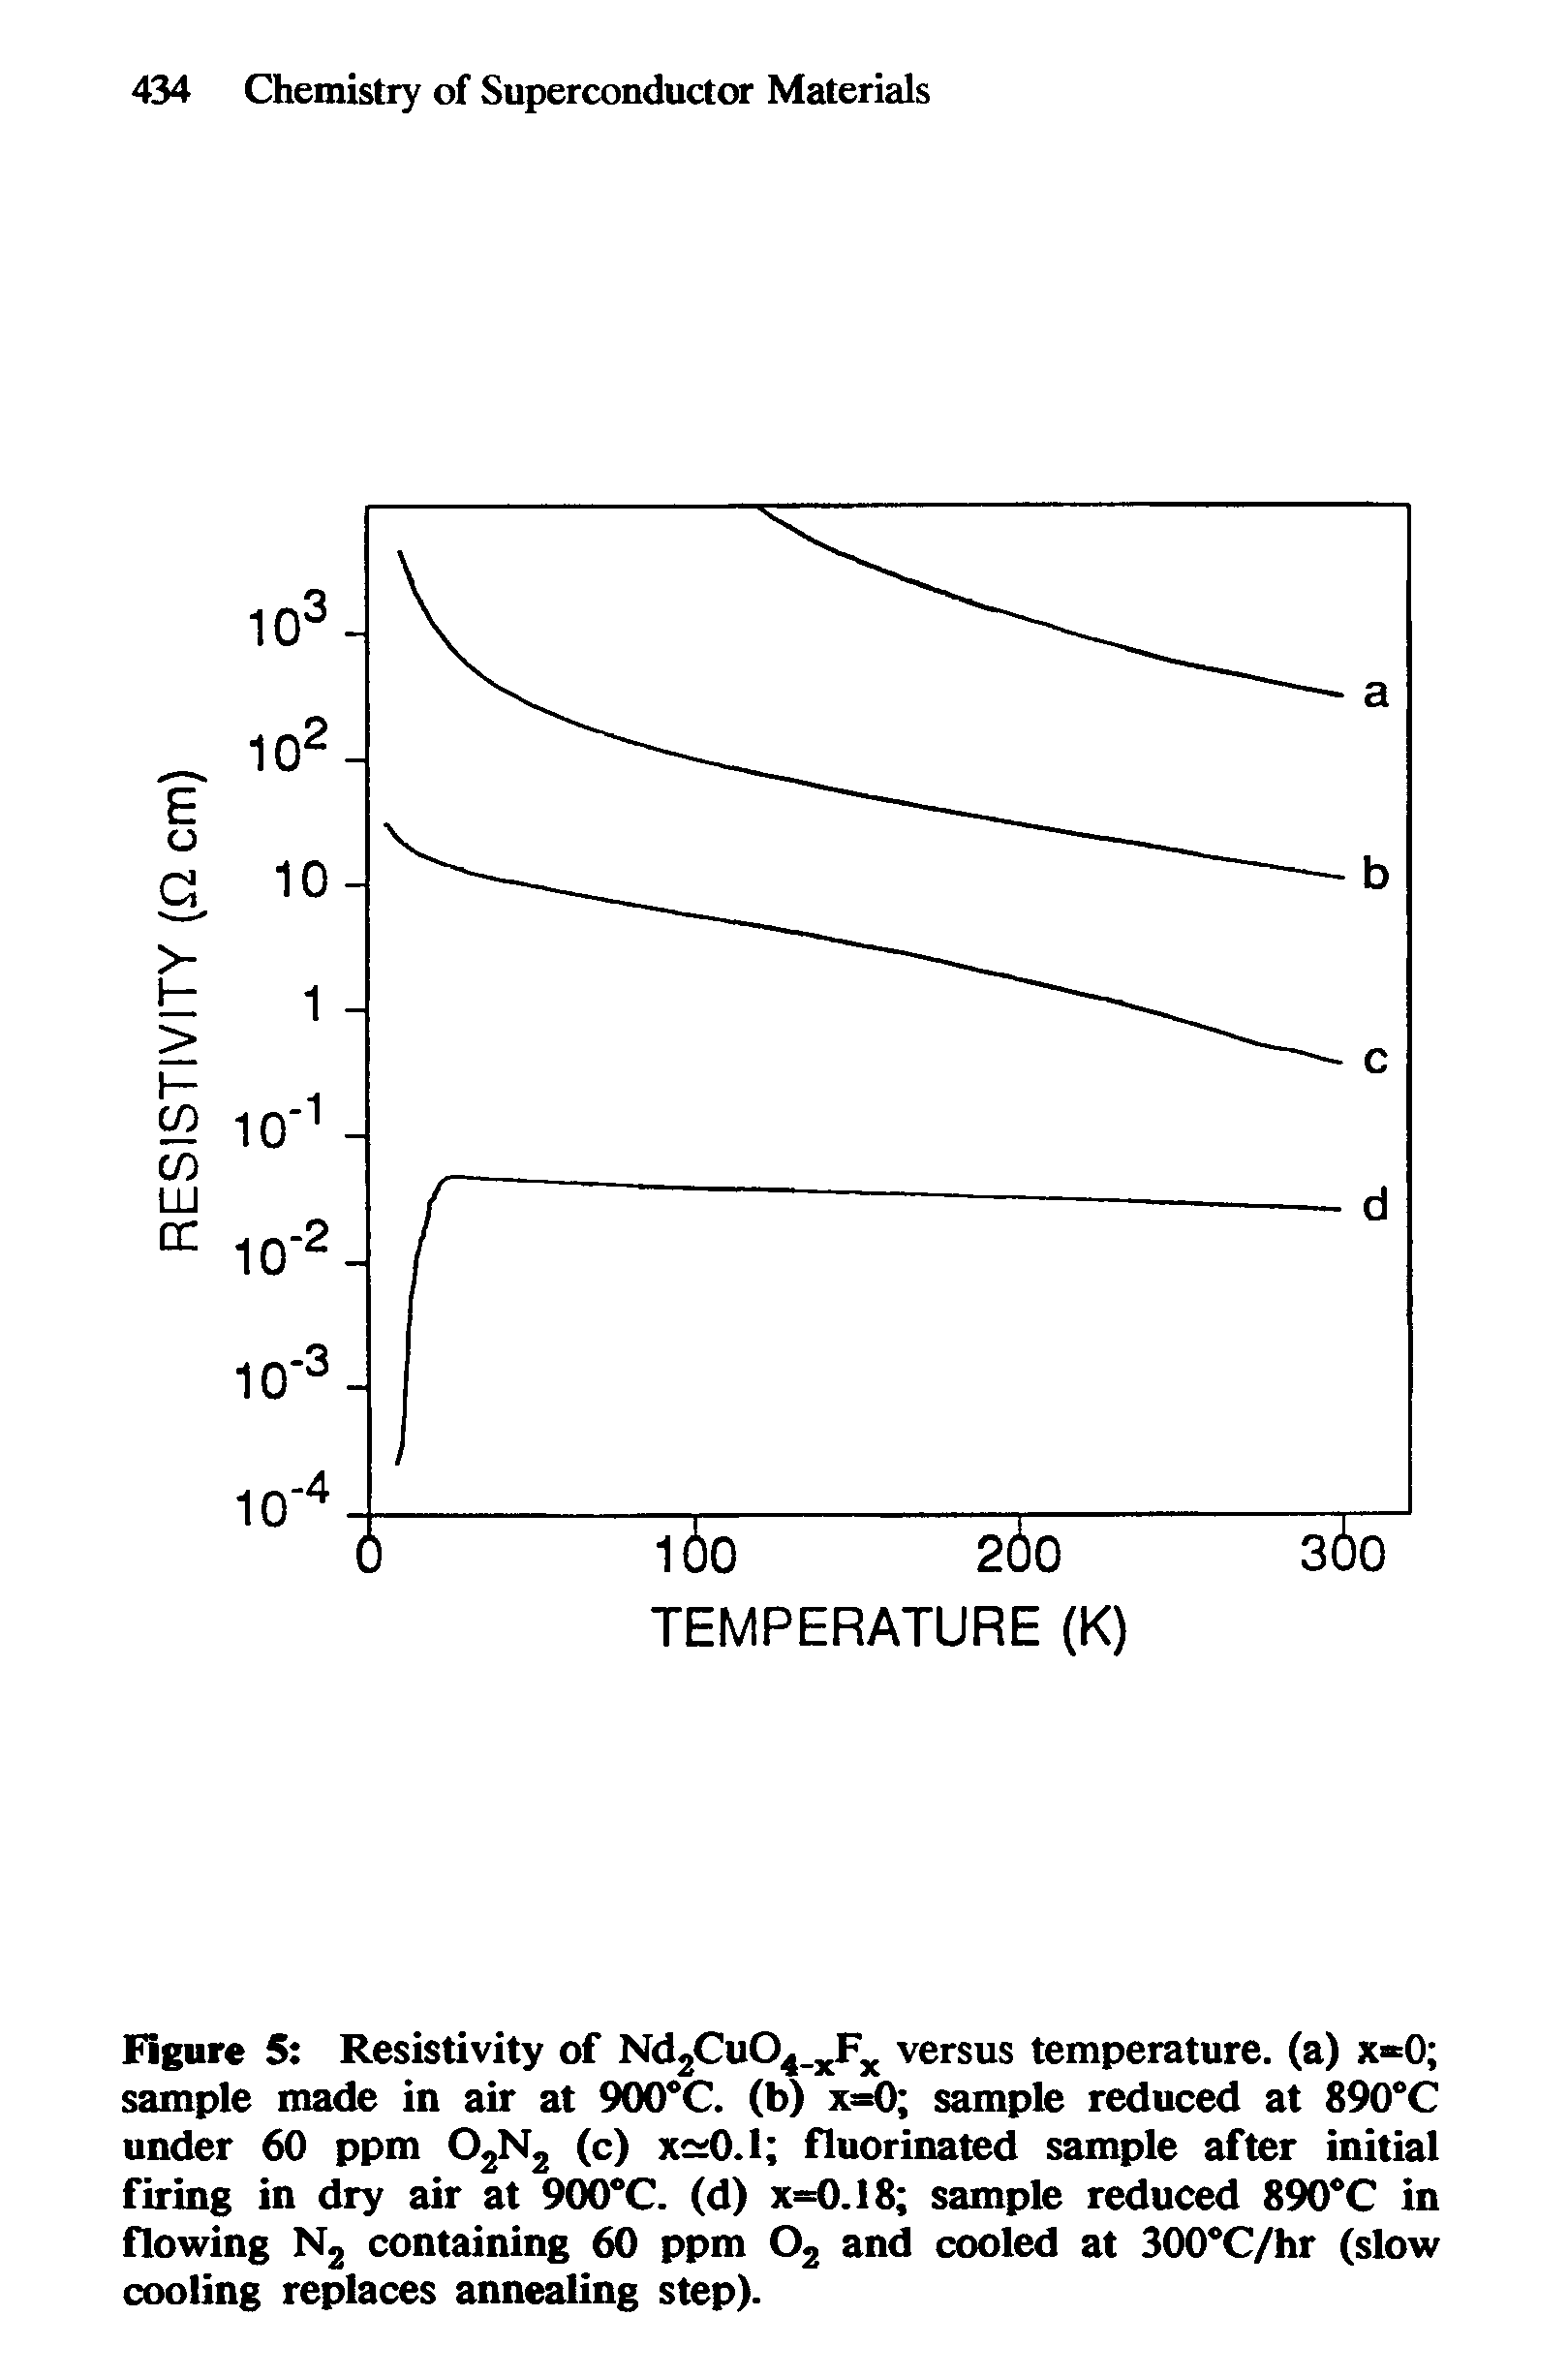 Figure 5 Resistivity of Nd2Cu04 xFx versus temperature, (a) x 0 sample made in air at 900°C. (b) x=0 sample reduced at 890°C under 60 ppm 02N2 (c) x 0.1 fluorinated sample after initial firing in dry air at 900°C. (d) x=0.18 sample reduced 890°C in flowing N2 containing 60 ppm 02 and cooled at 300°C/hr (slow cooling replaces annealing step).